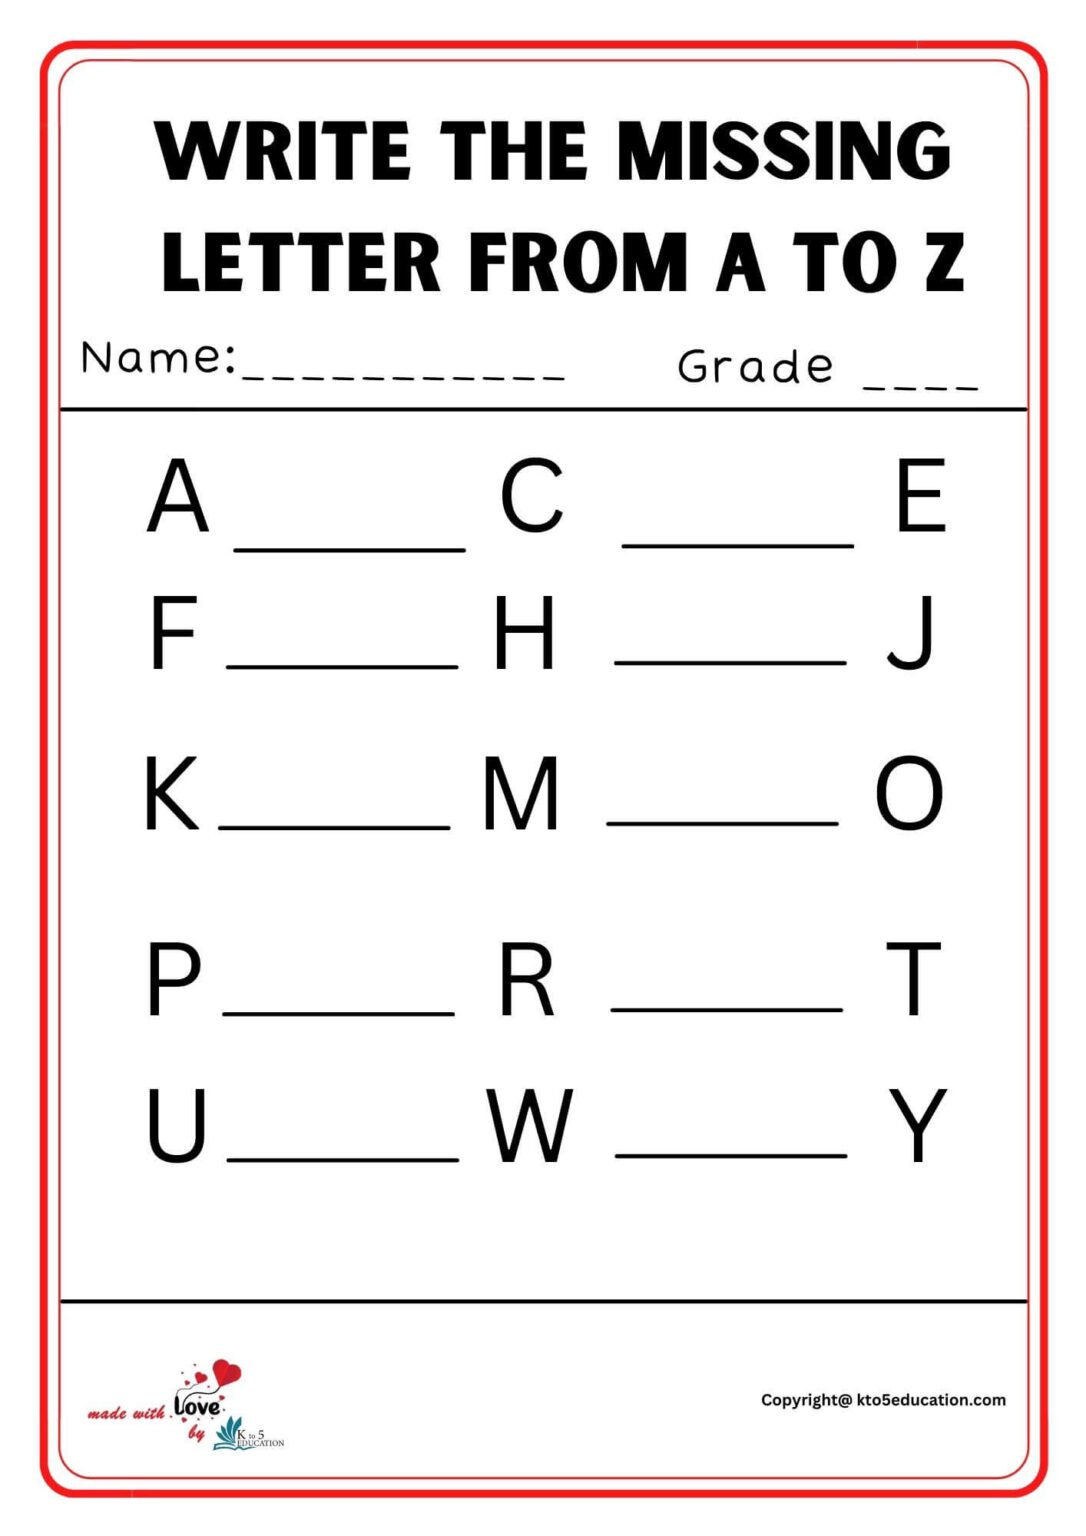 write-the-missing-letter-from-a-to-z-worksheet-free